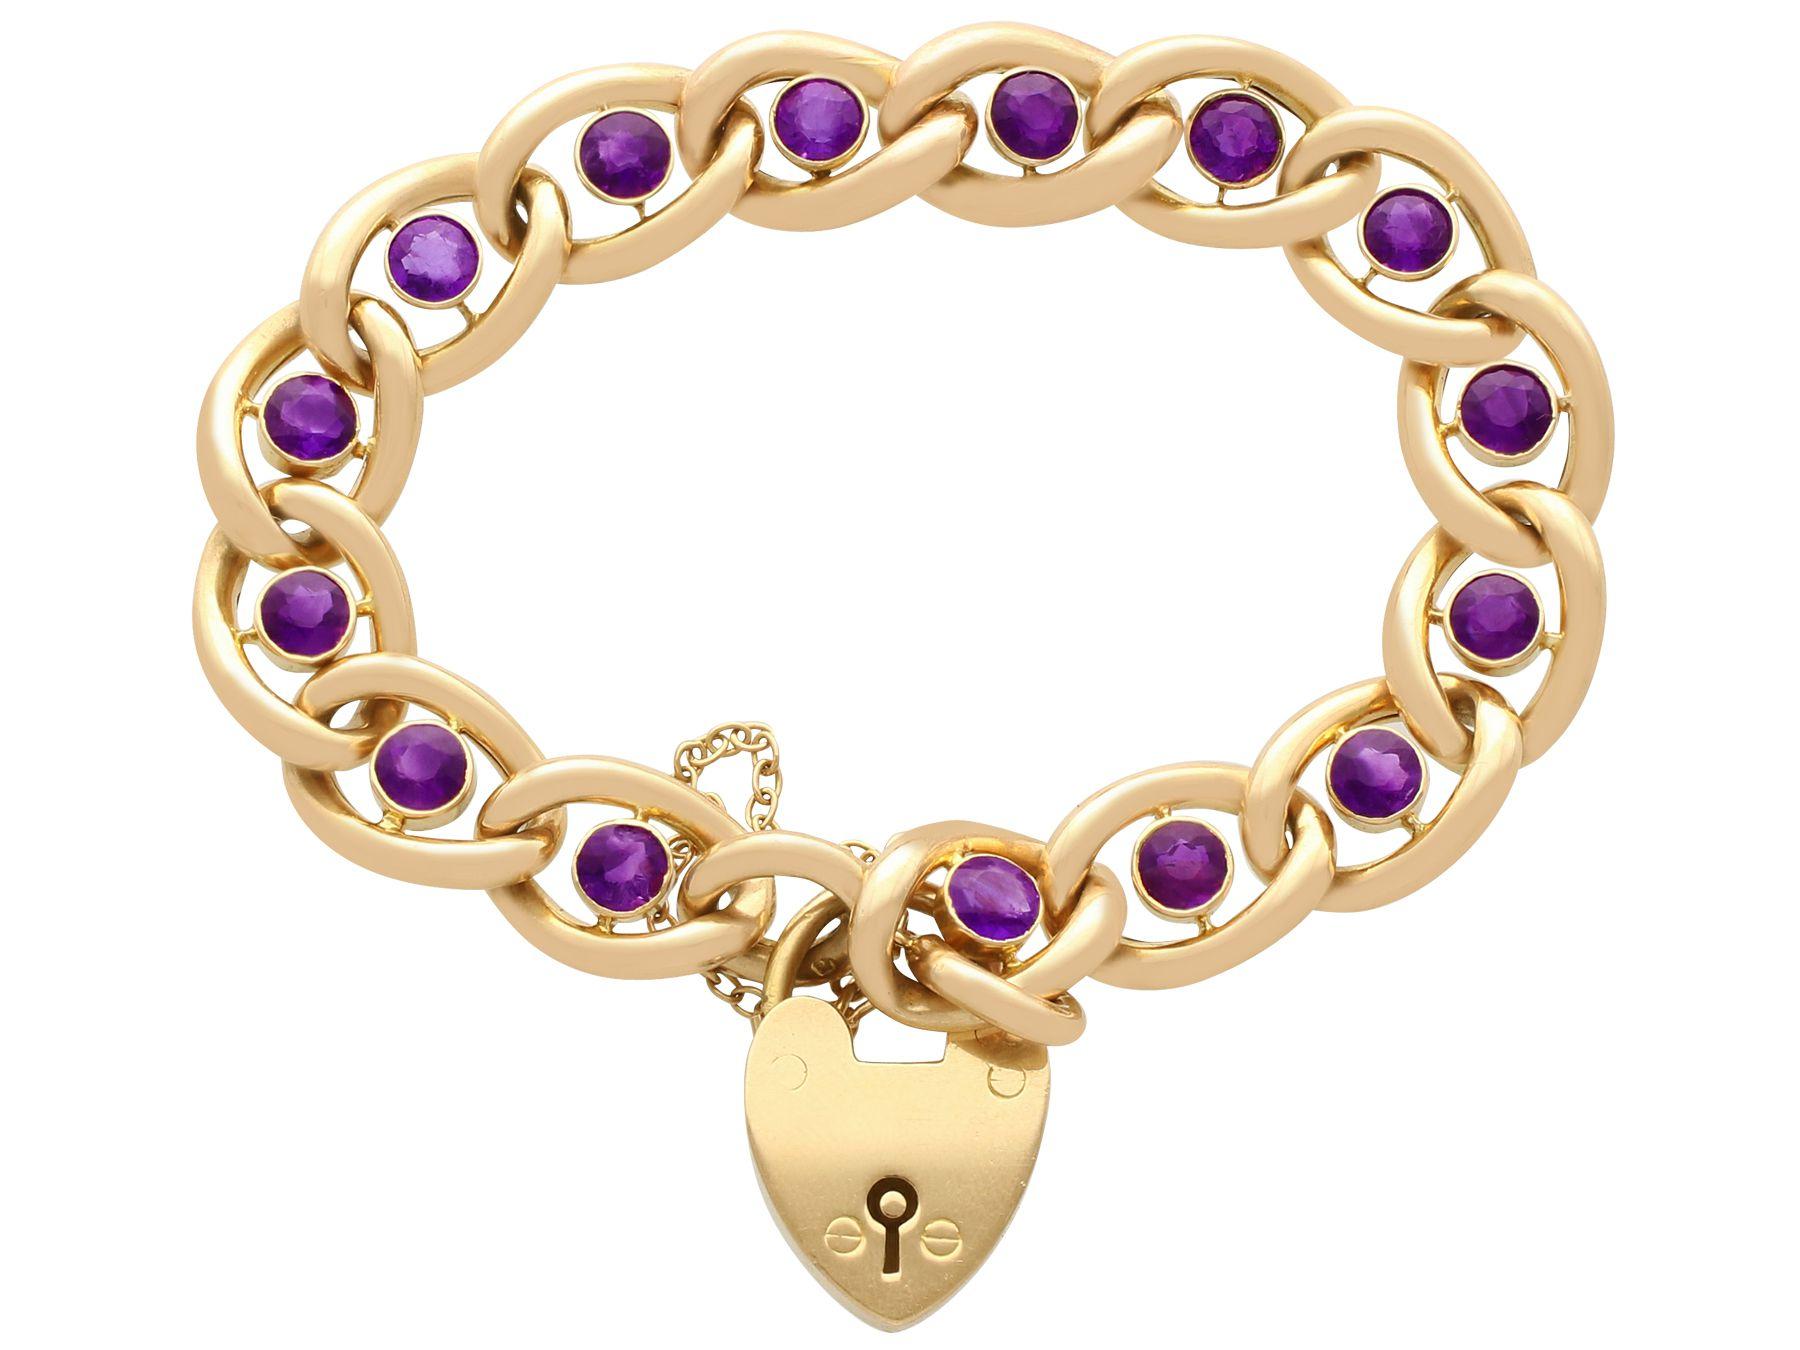 A stunning, fine and impressive antique Victorian 3.75 carat amethyst and 15 karat yellow gold link bracelet with a heart shaped padlock clasp; part of our diverse antique jewelry and estate jewelry collections.

This stunning, fine and impressive